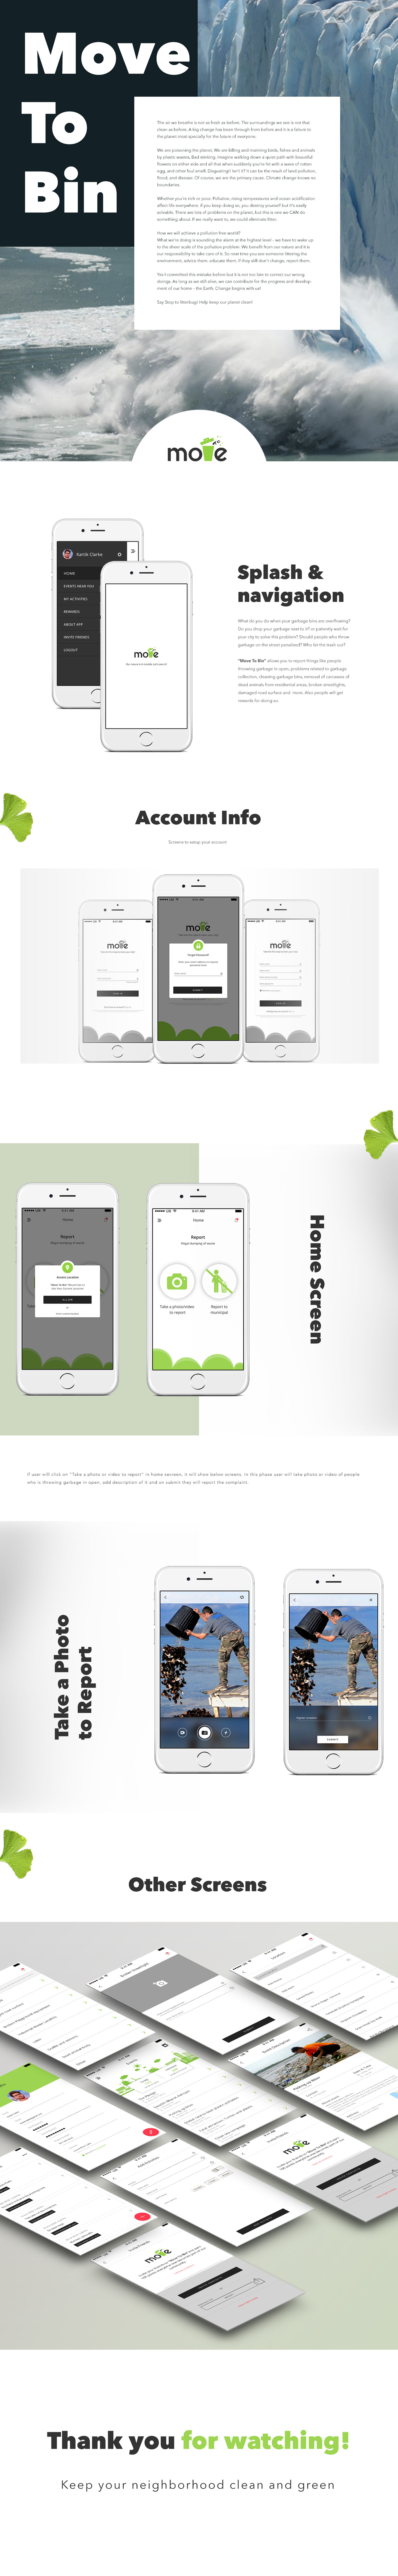 uxui mobile inspiration design android ios appapplication graphics climate pollution